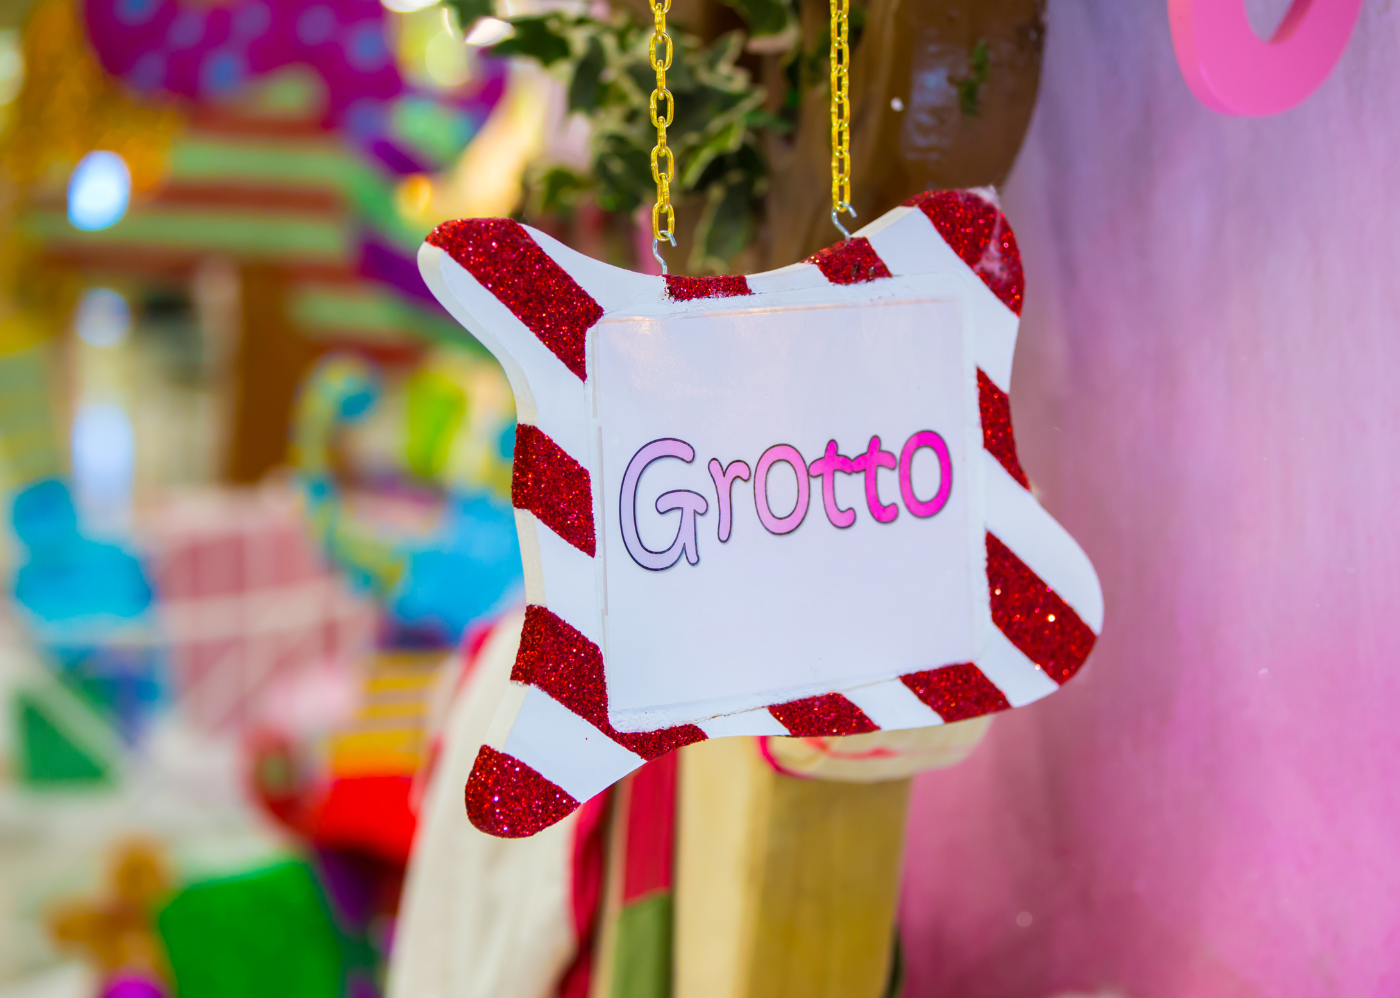 Santa's Grotto & Hope Tree Raising Funds for Cuckfield Stroke Association and Parkinson's Group